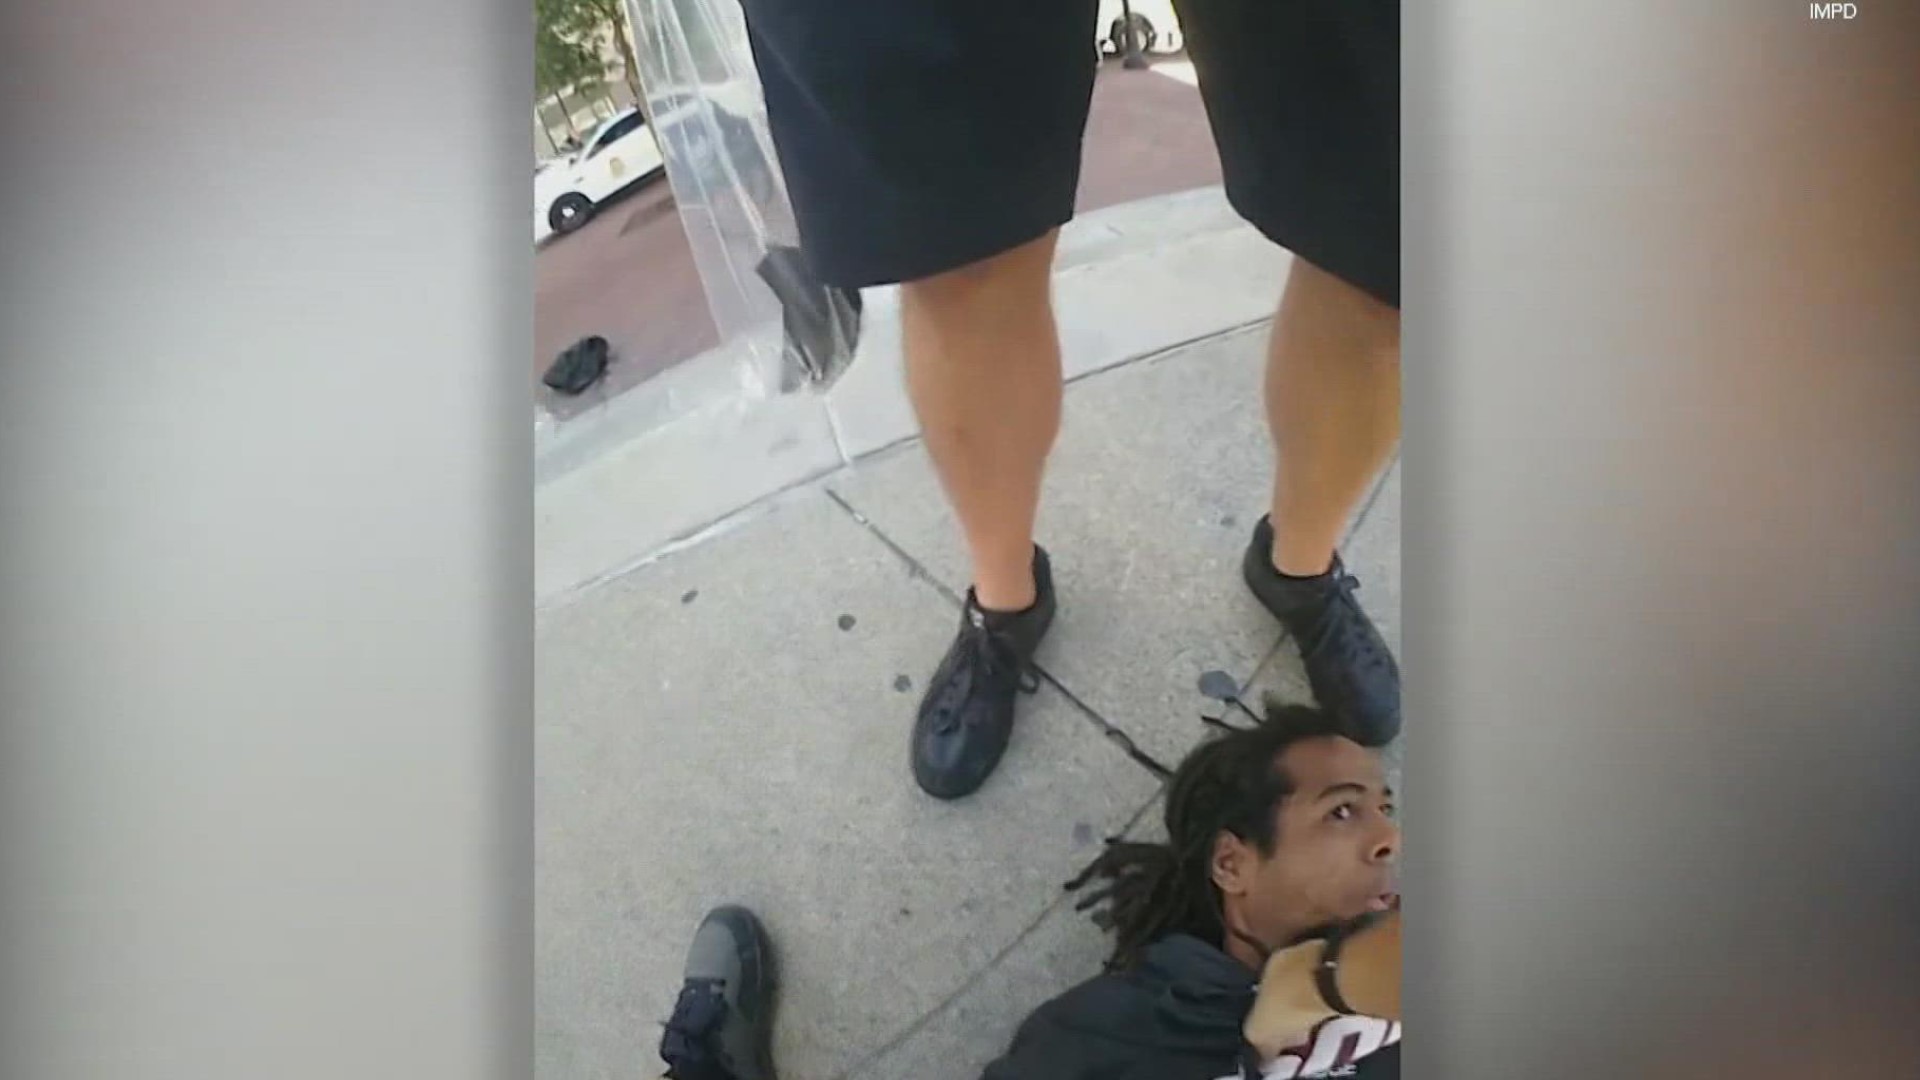 IMPD Sgt. Eric Huxley is facing two criminal charges after body cam footage showed him kicking a man in his face during an arrest.